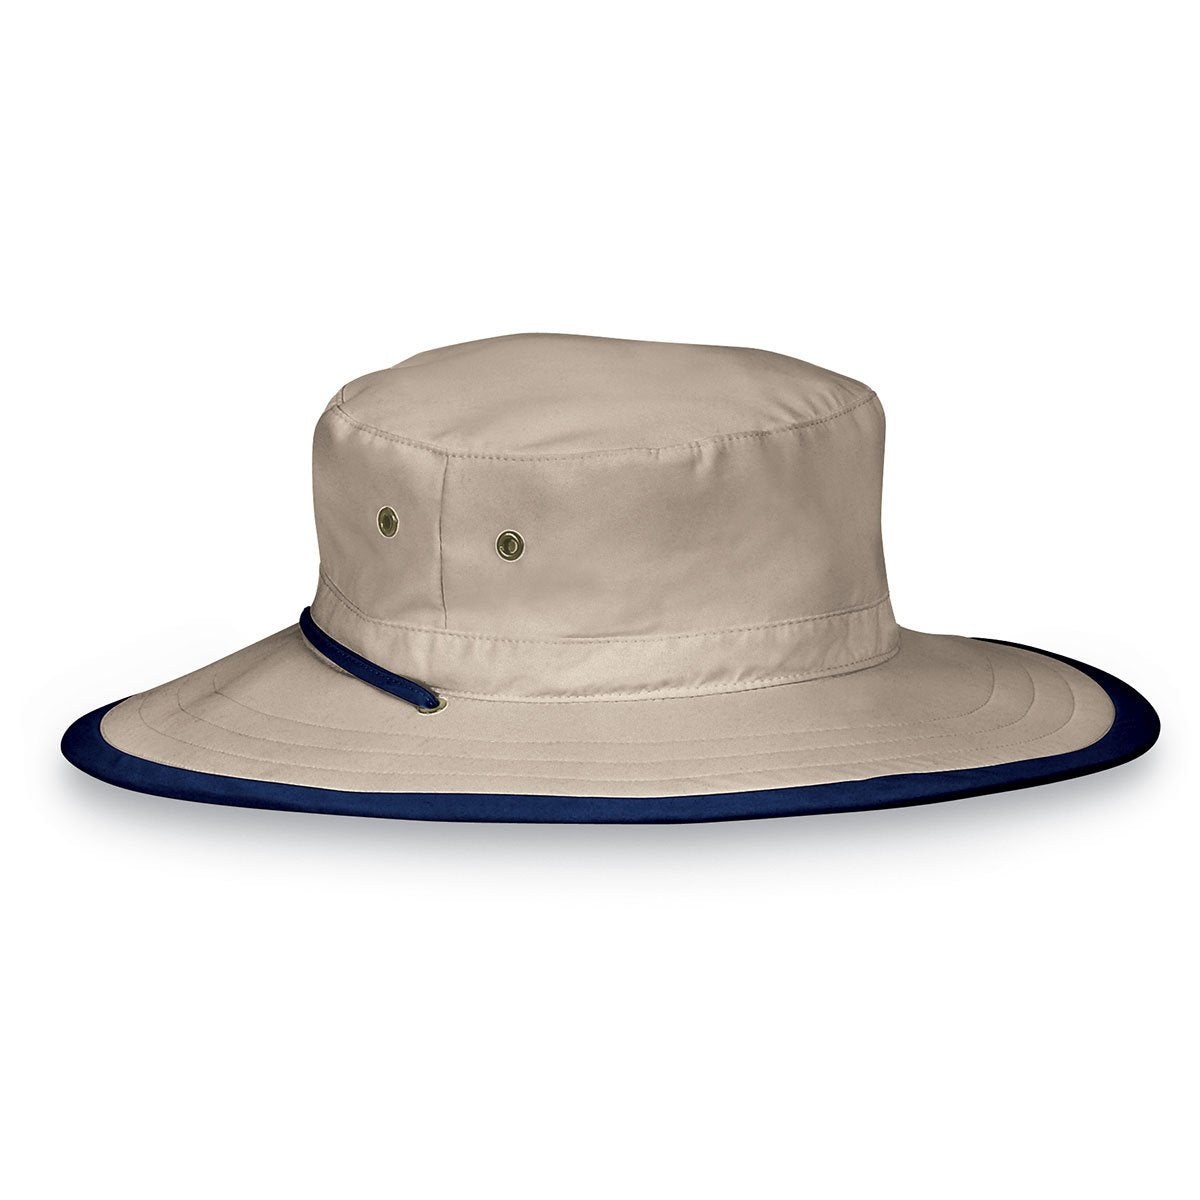 Featuring Explorer Men's Microfiber Bucket Style UPF Sun Hat with Chinstrap in Camel Navy from Wallaroo